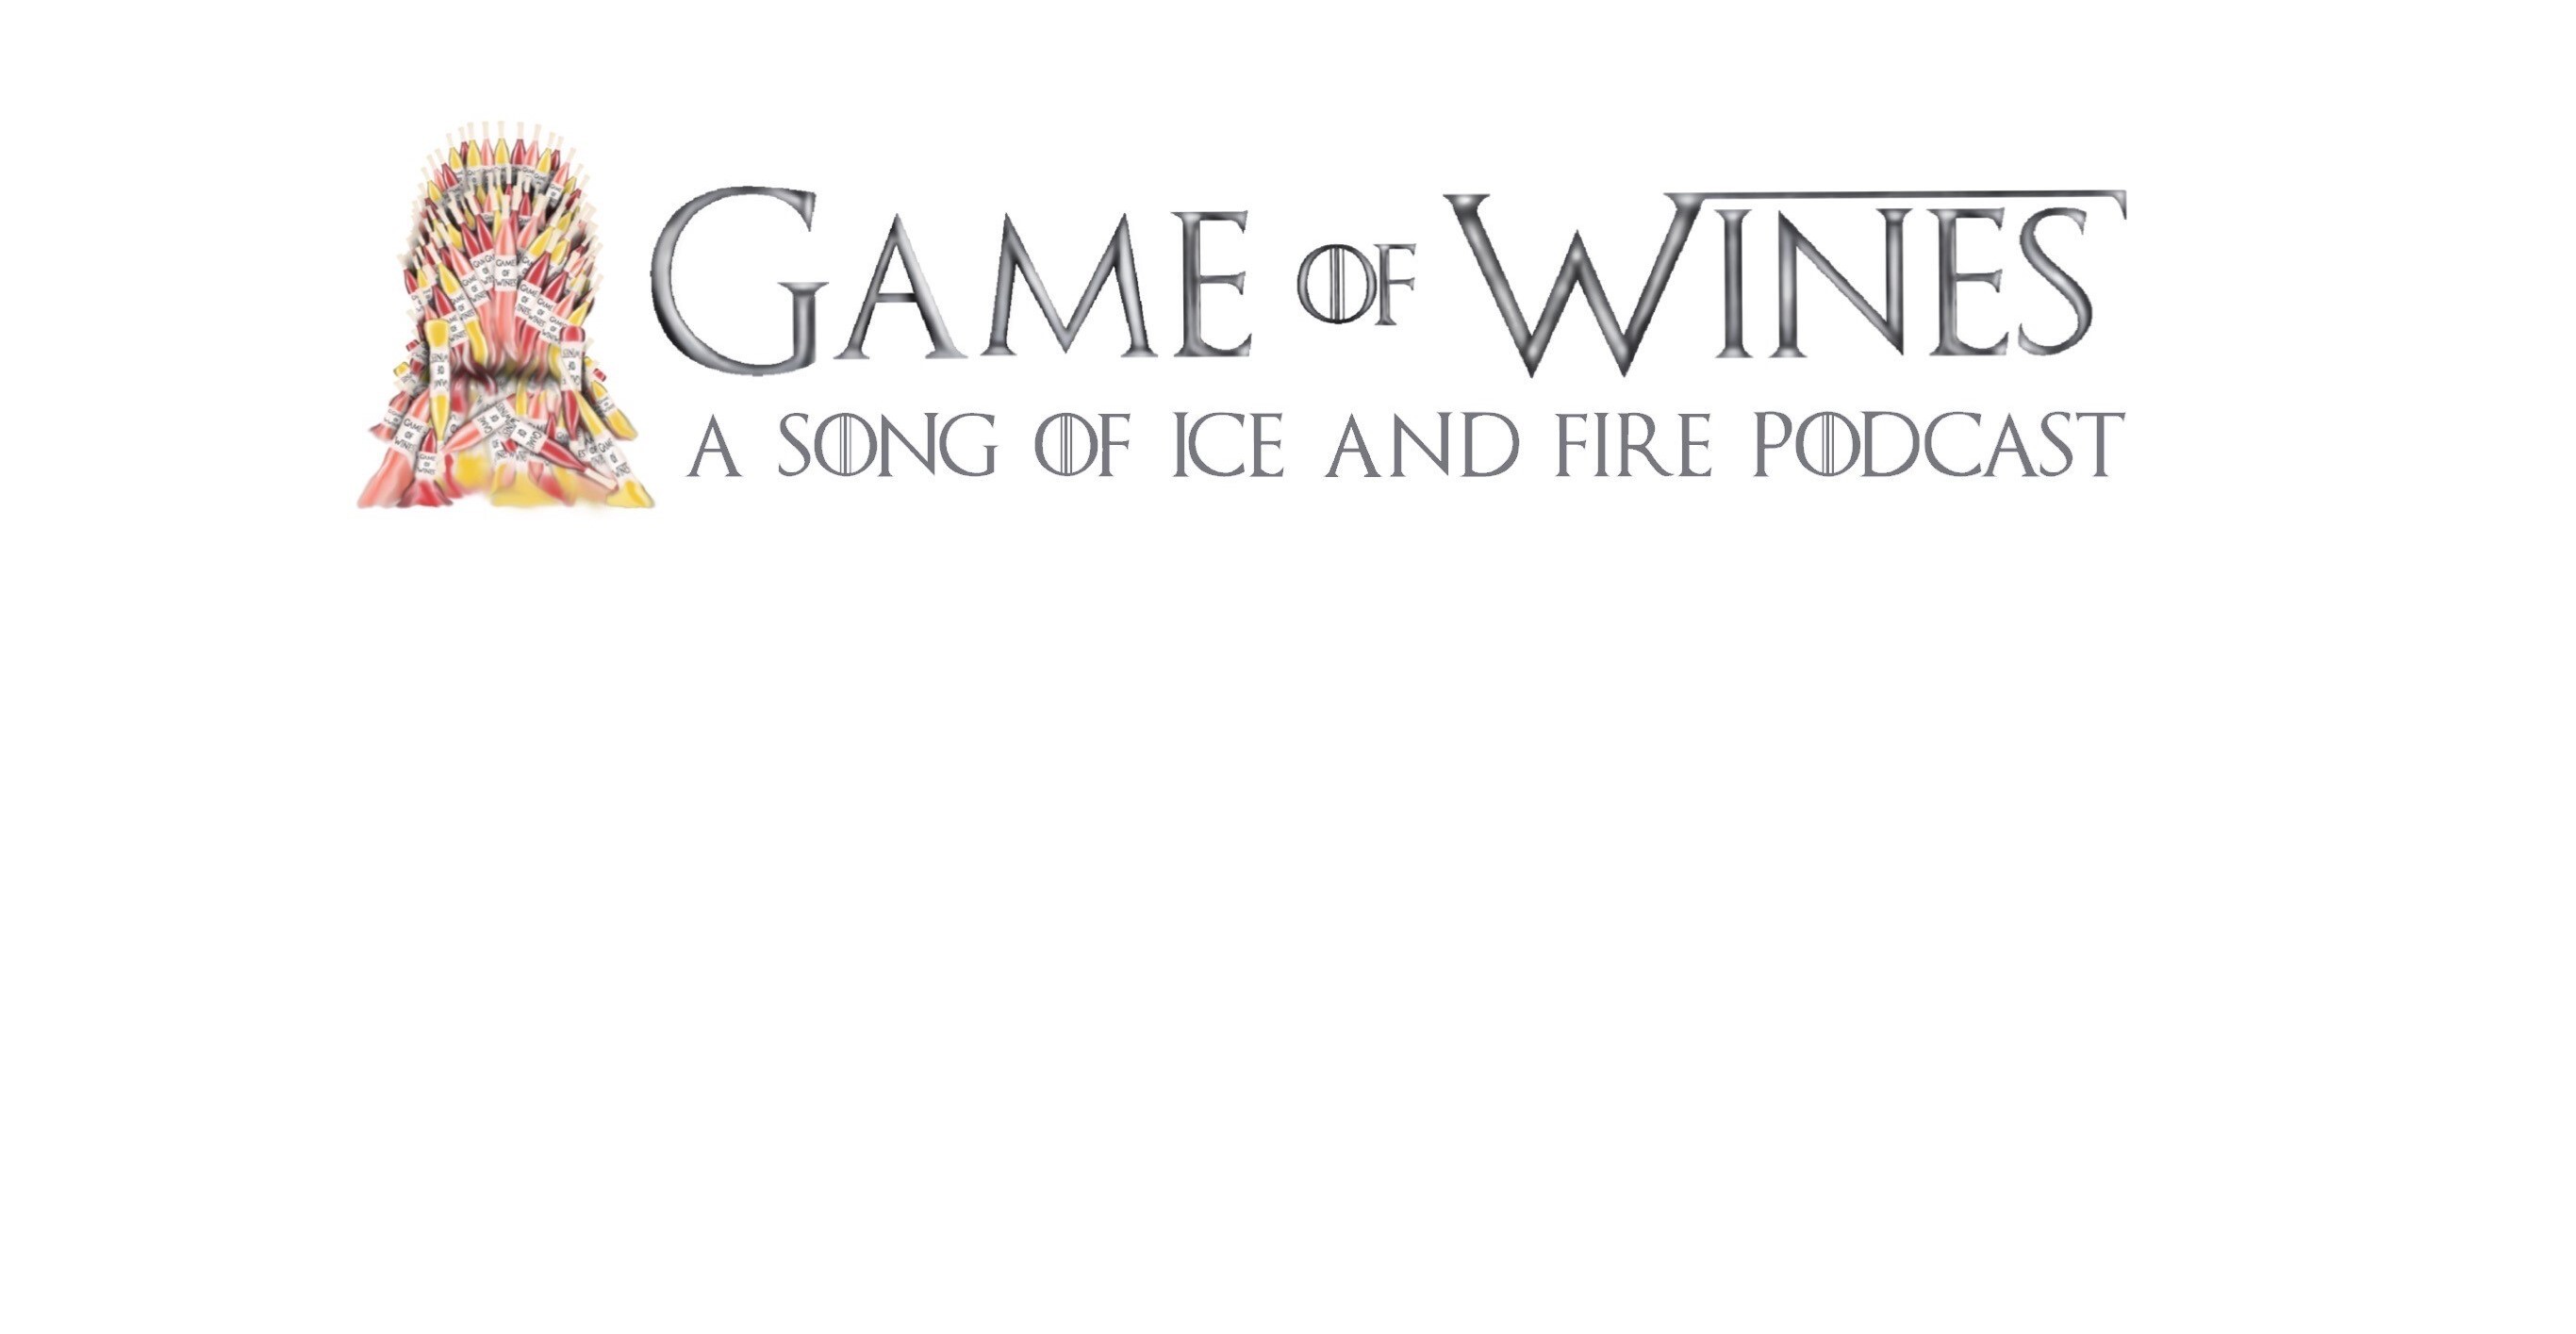 Game of Wines: A Song of Ice and Fire Podcast